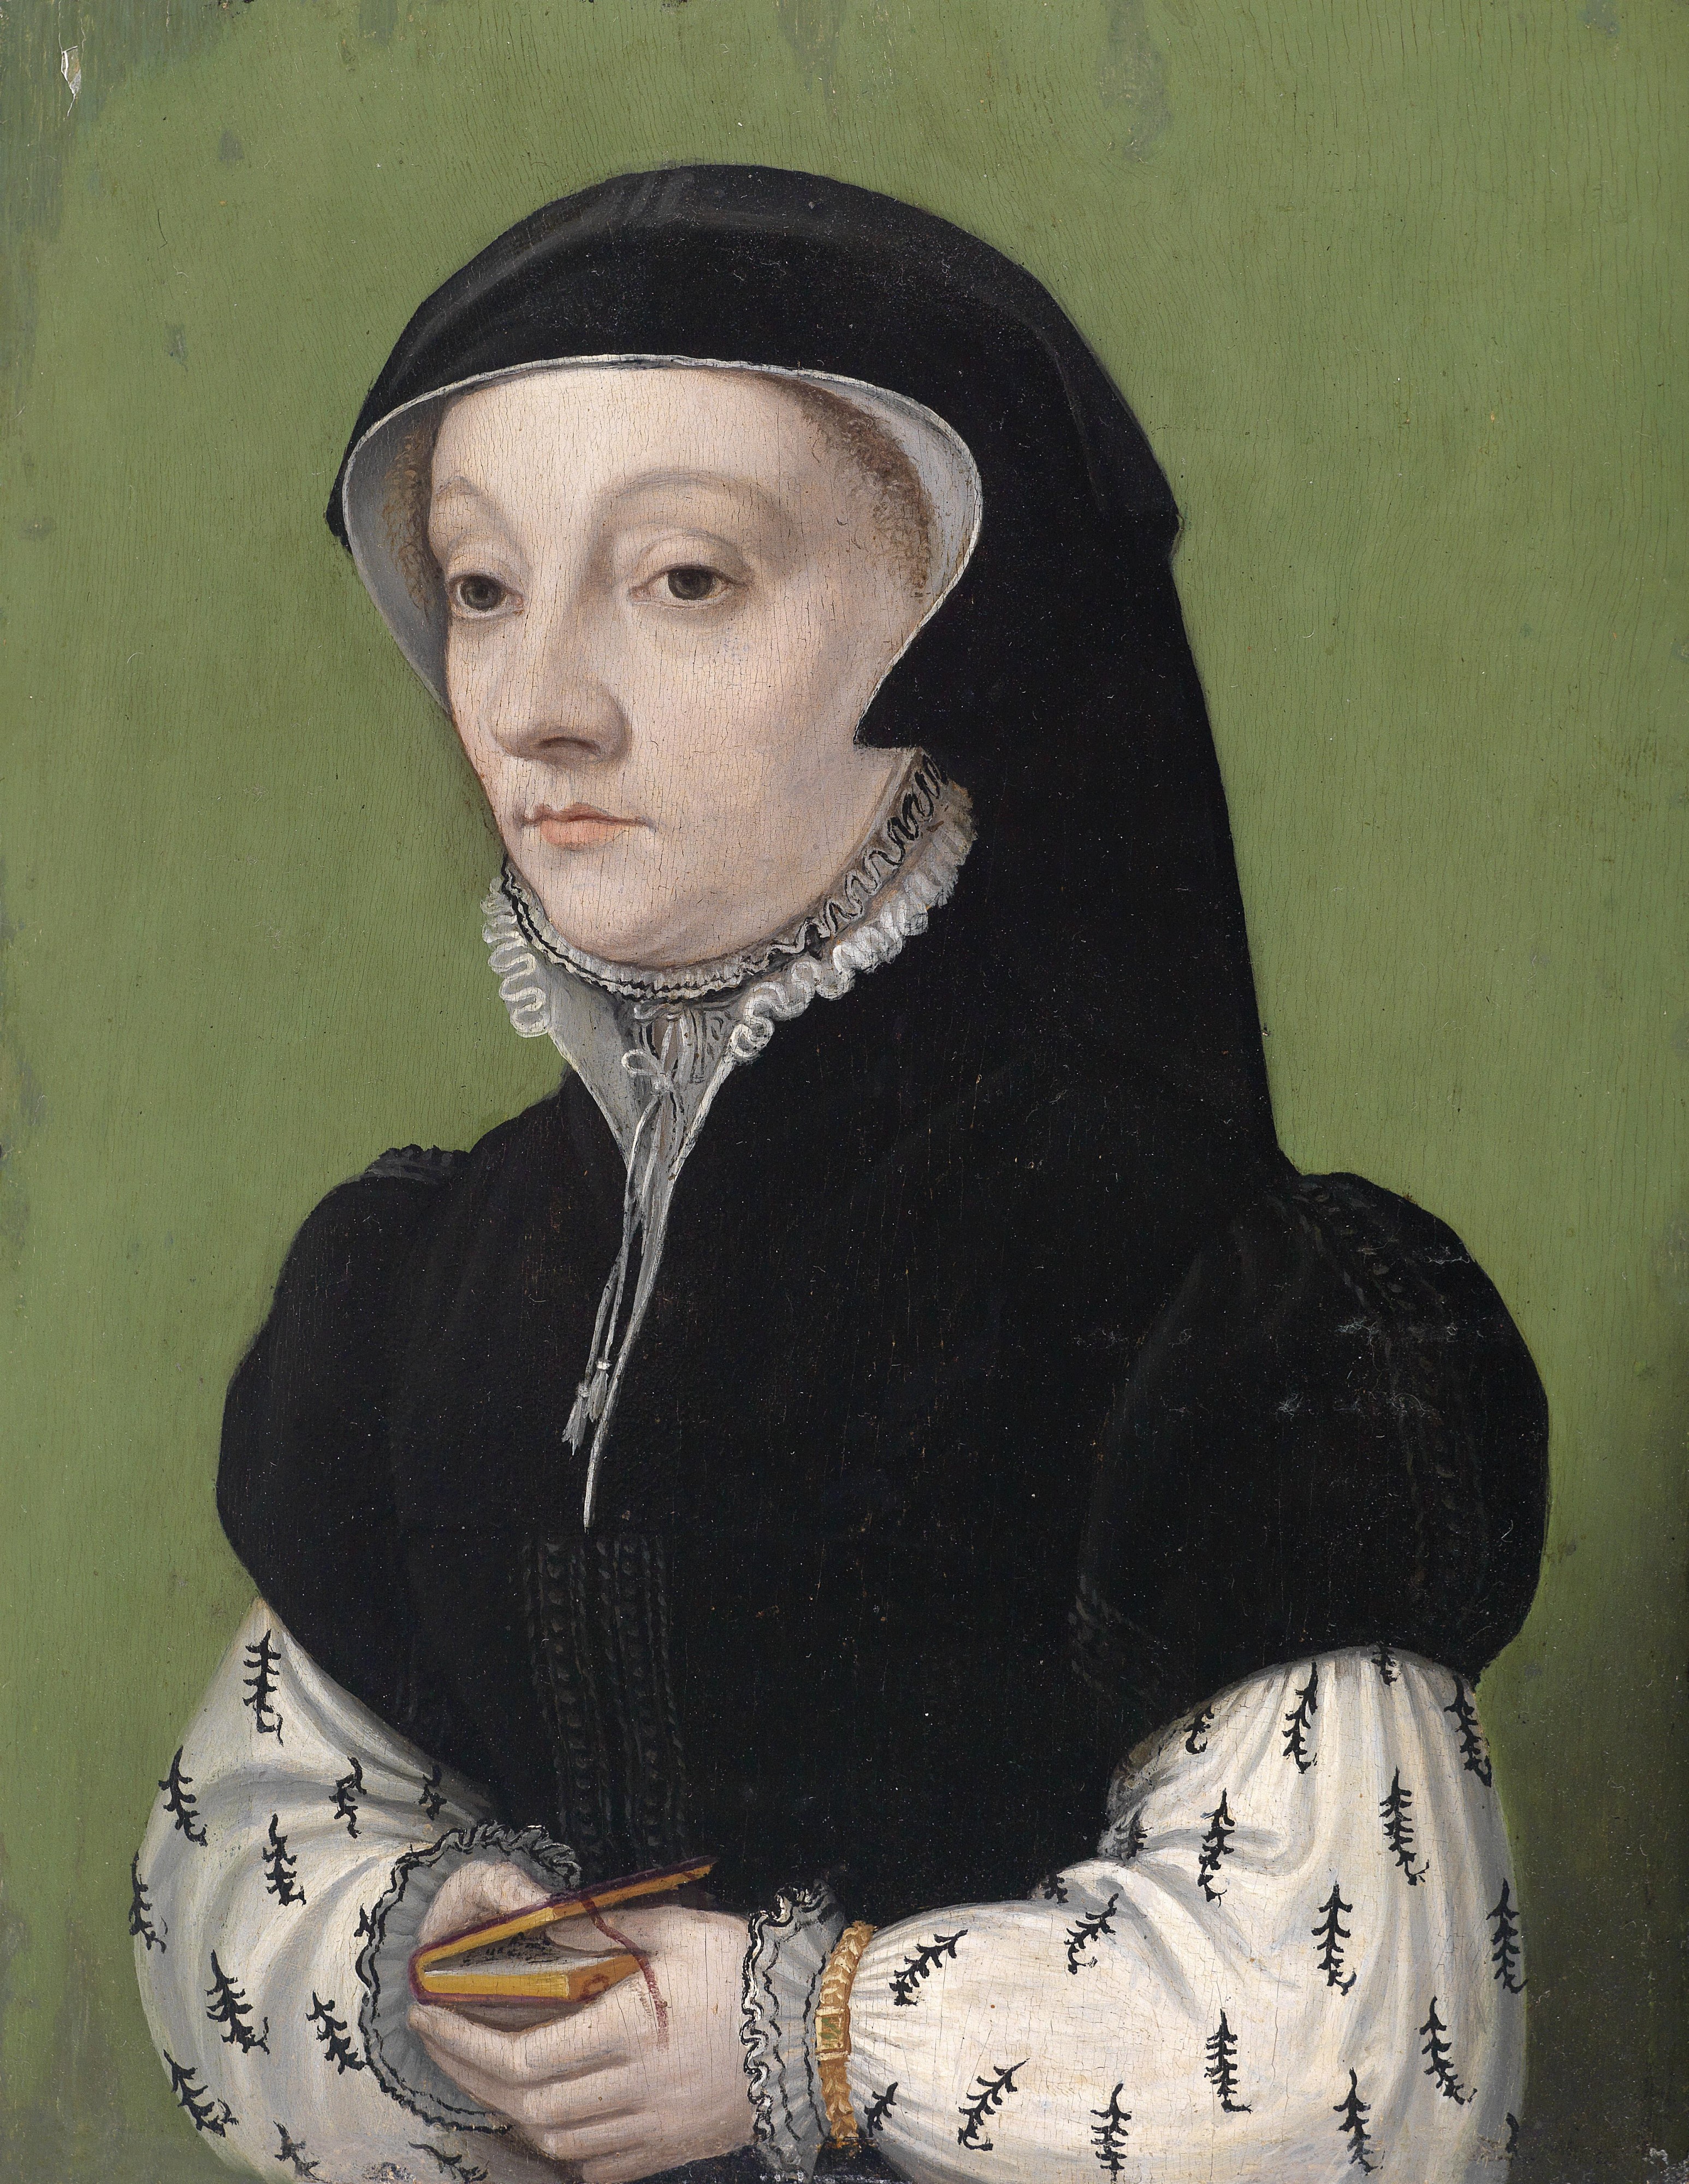 NL 16th century Portait of a women holding a book